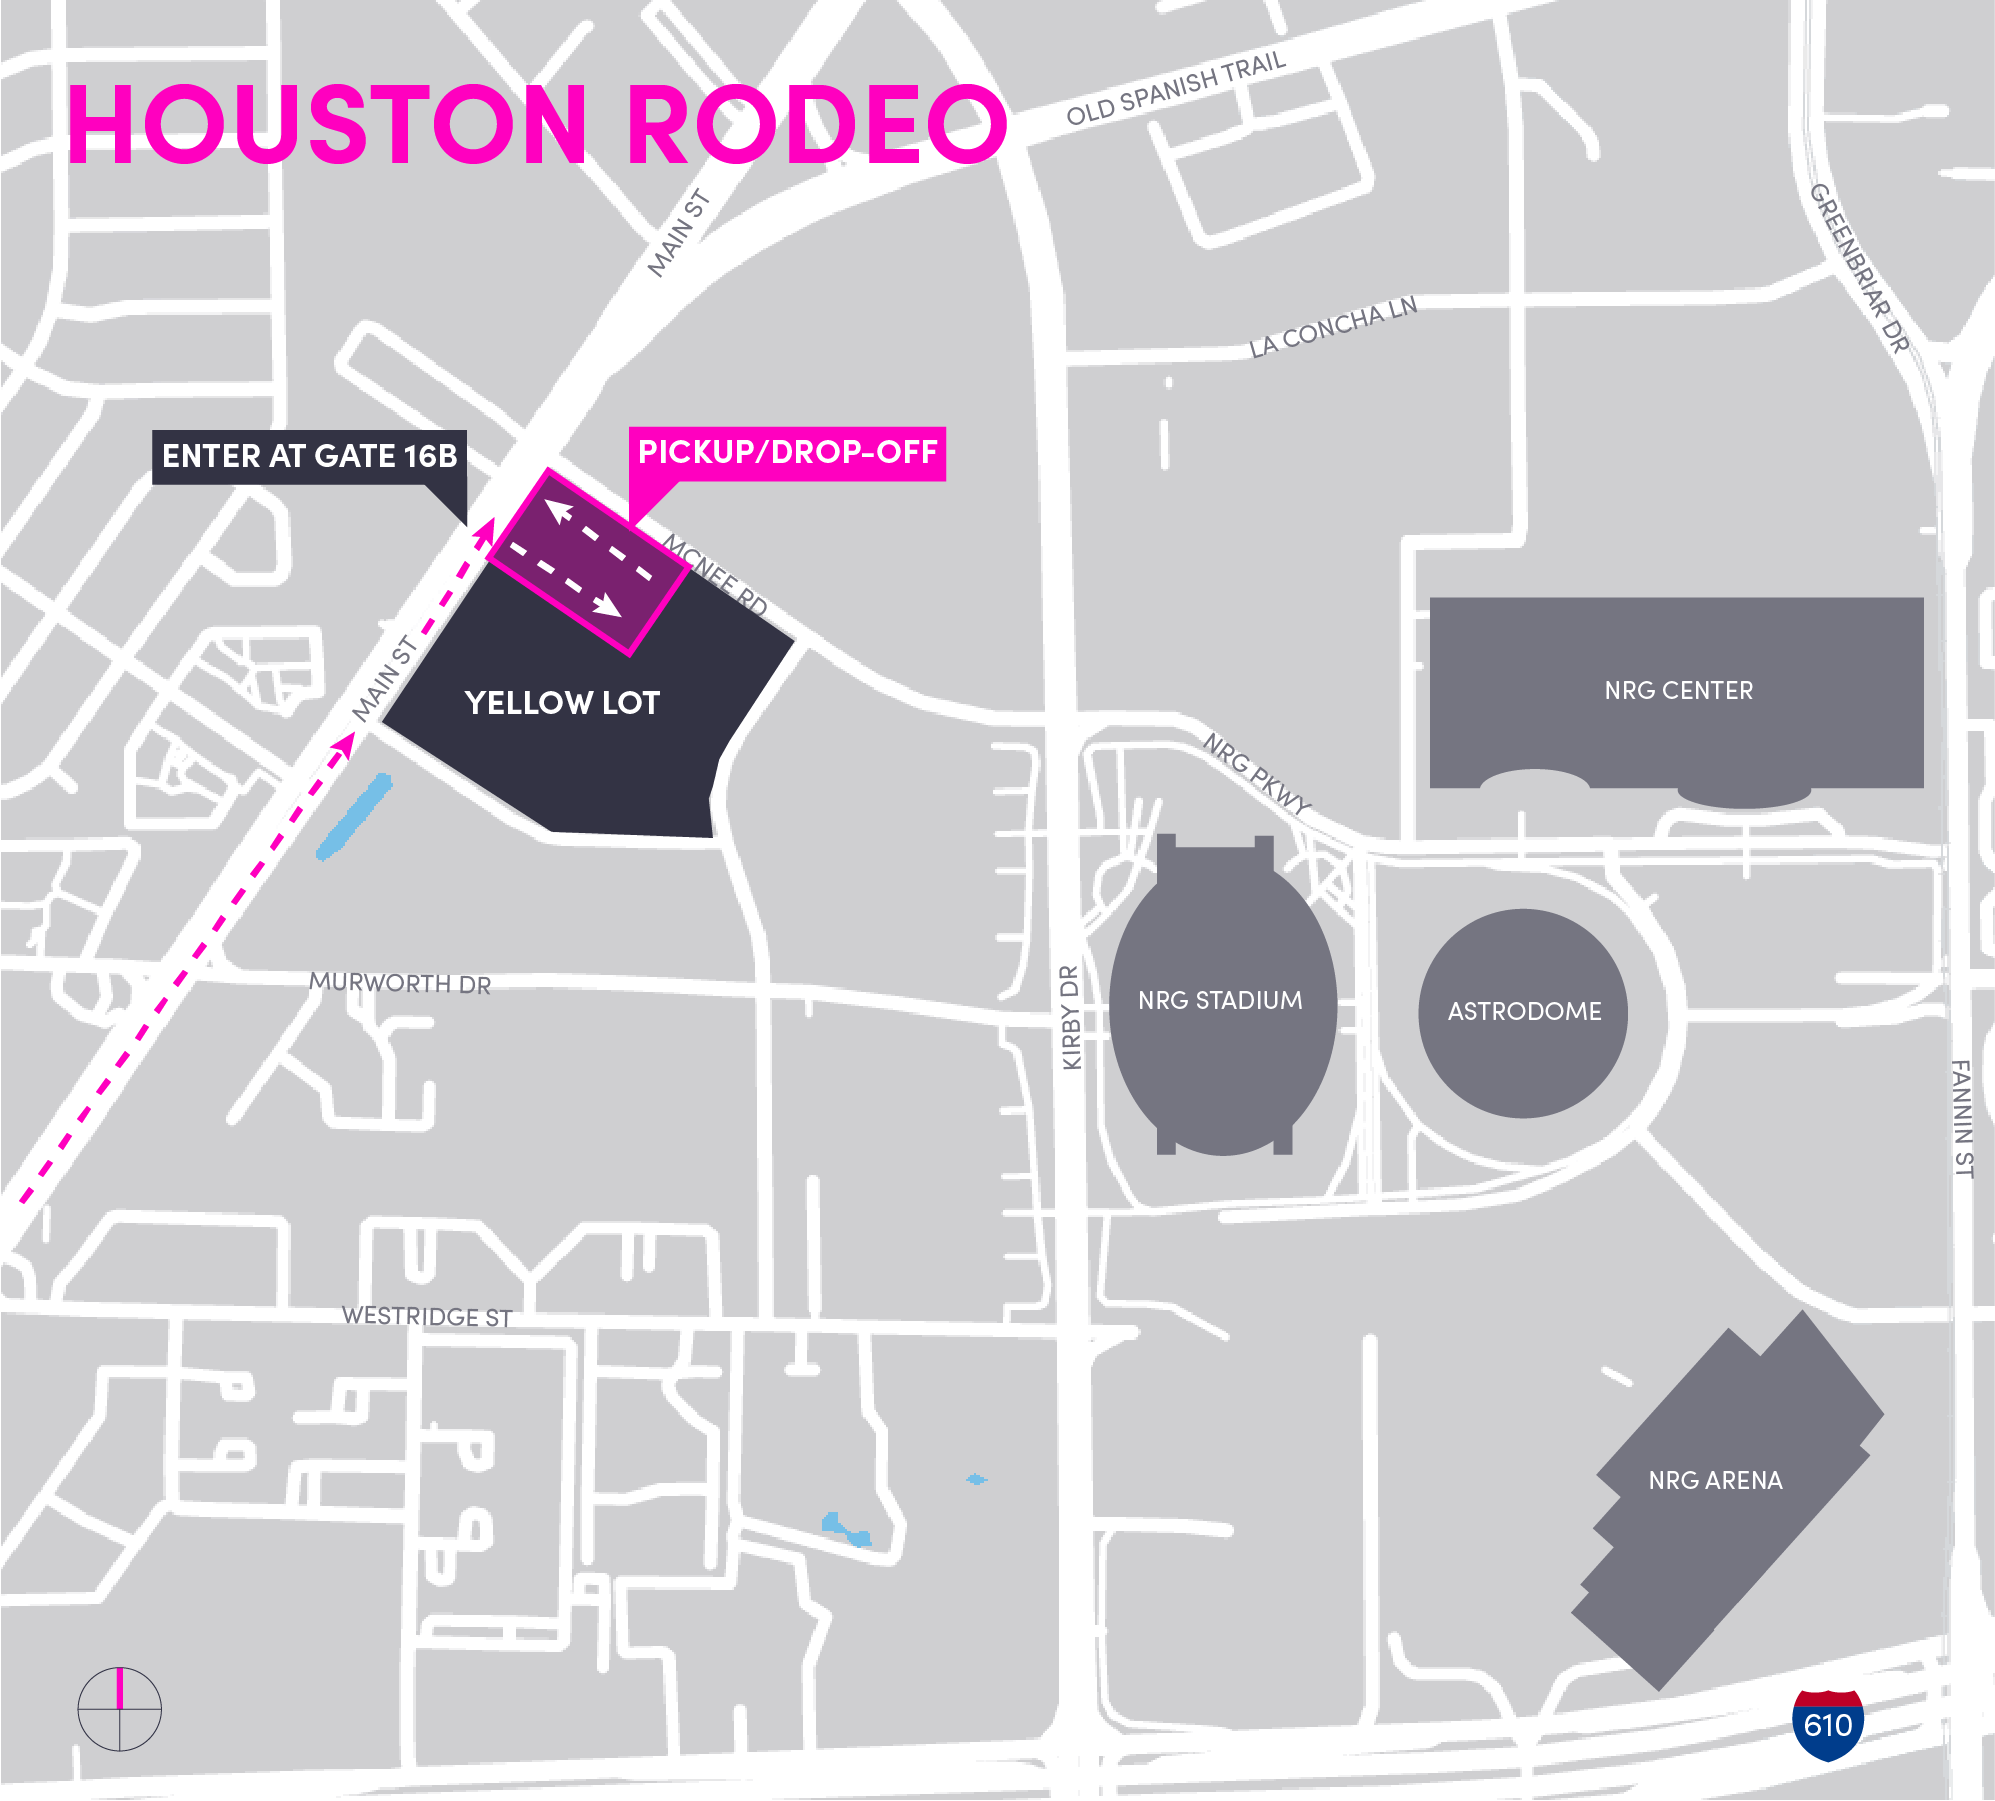 This is a map of the NRG Stadium for the Rodeo, showing pickup and dropoff area in the Yellow Lot.